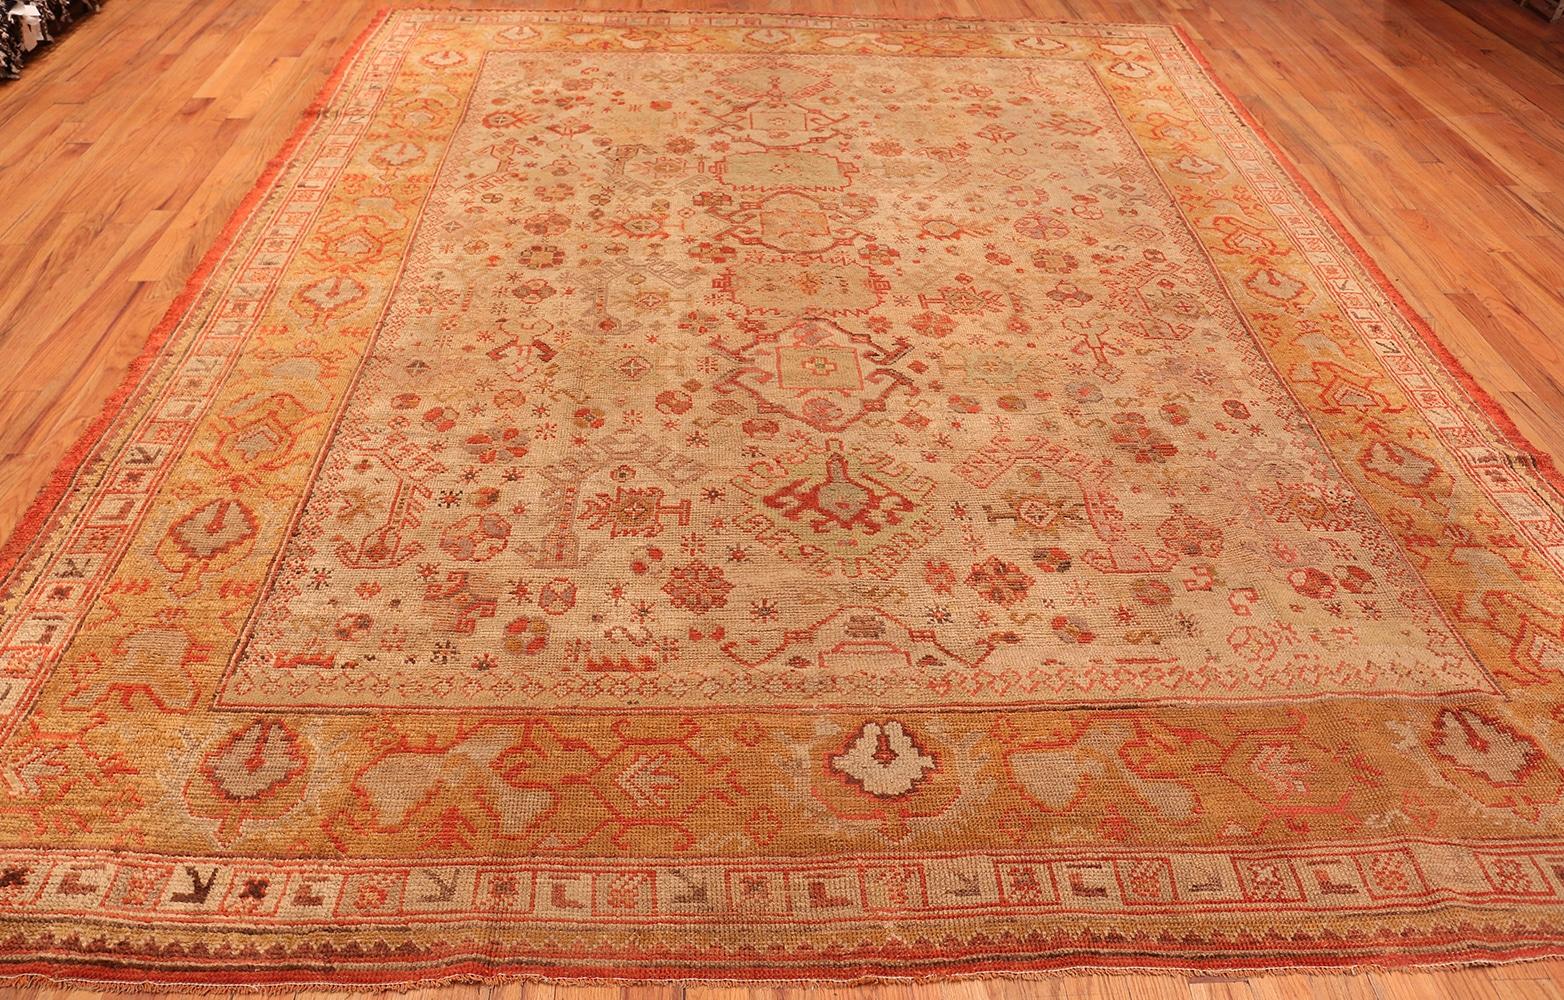 Nazmiyal Collection Antique Turkish Oushak Rug. Size: 10 Ft x 12 Ft 3 in  1